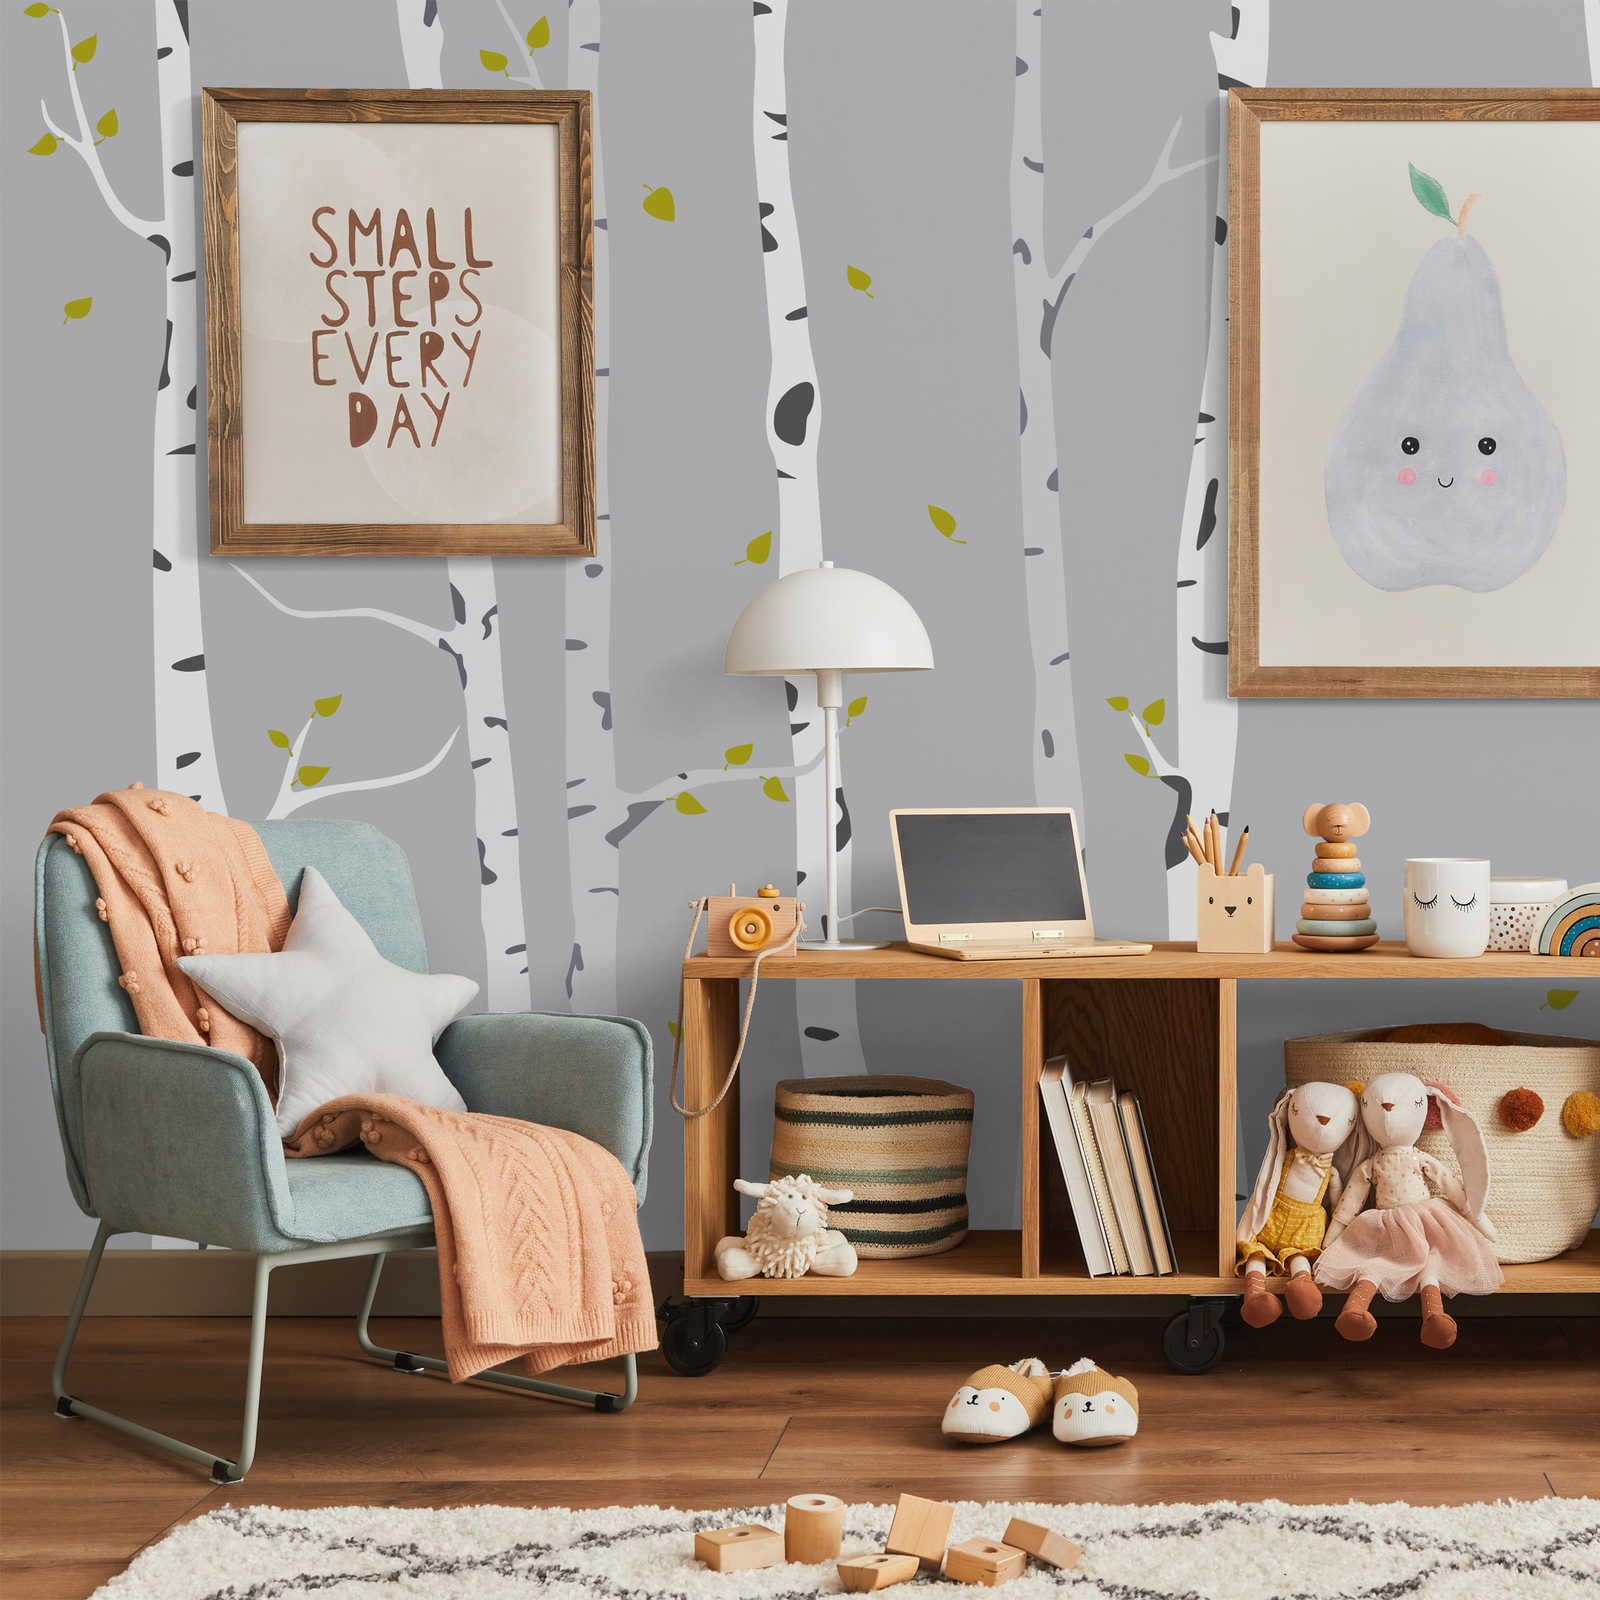 Photo wallpaper with painted birch forest for children's room - Smooth & matt non-woven
